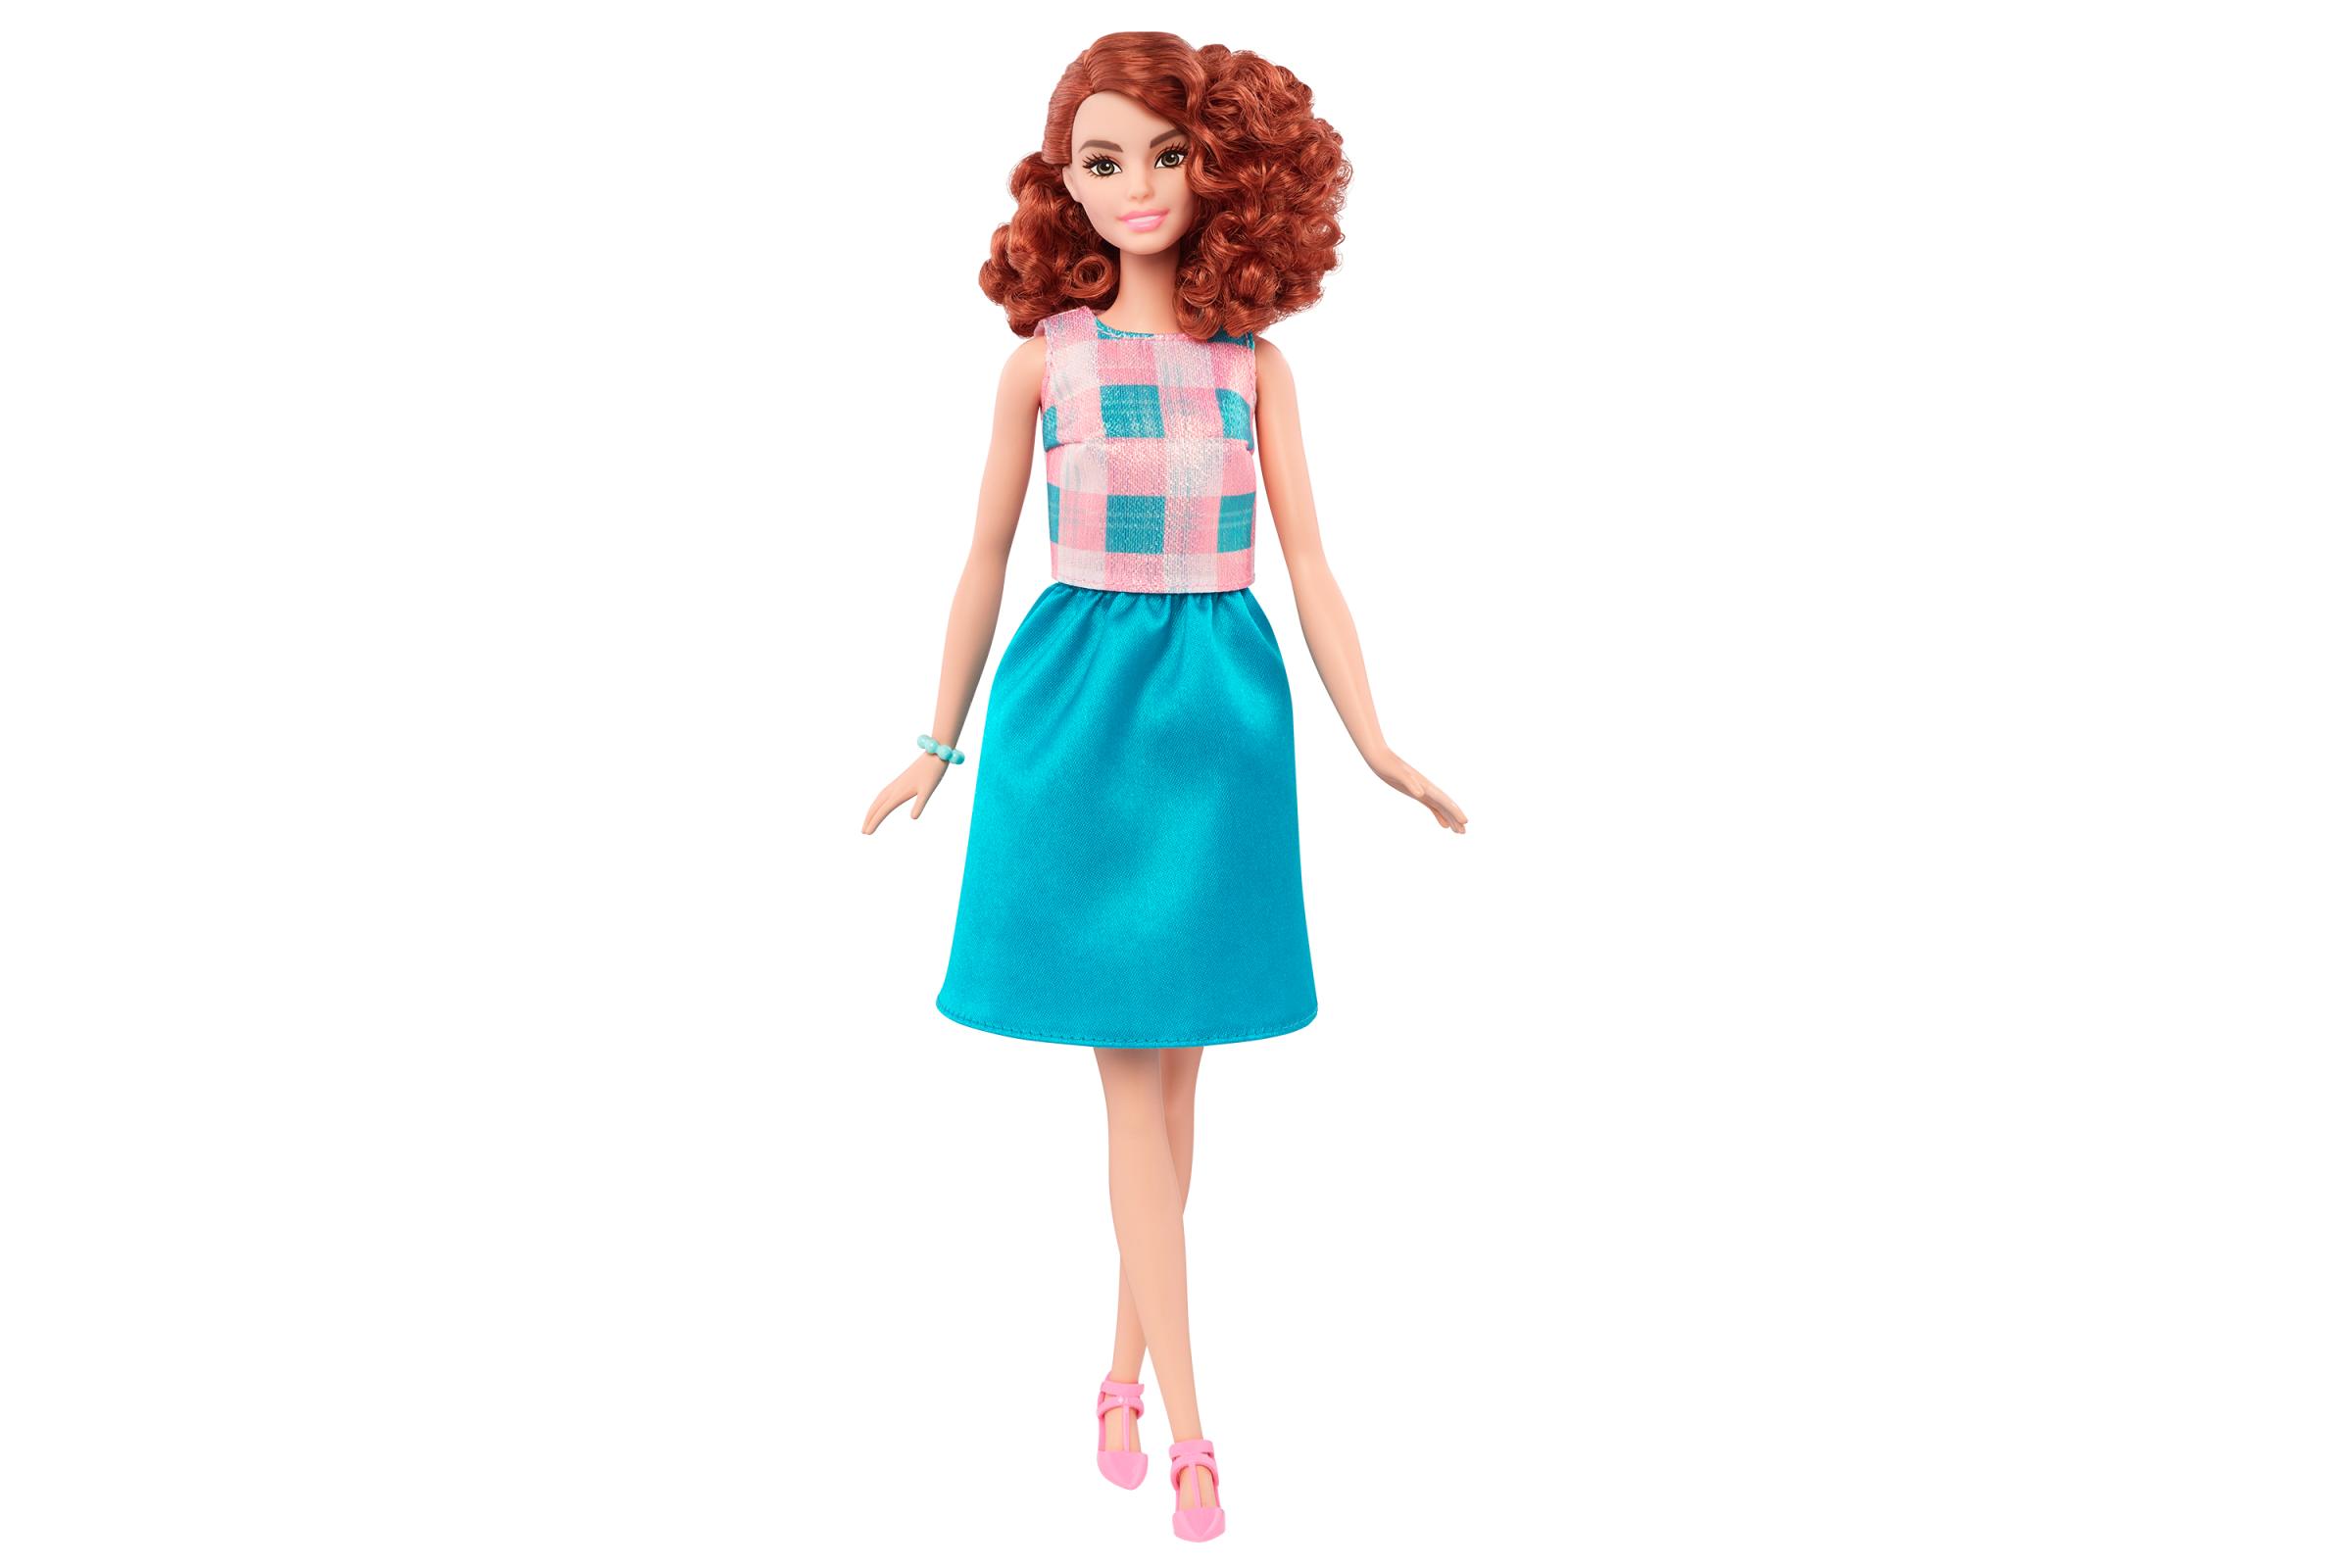 One of Mattel's new Tall Barbies